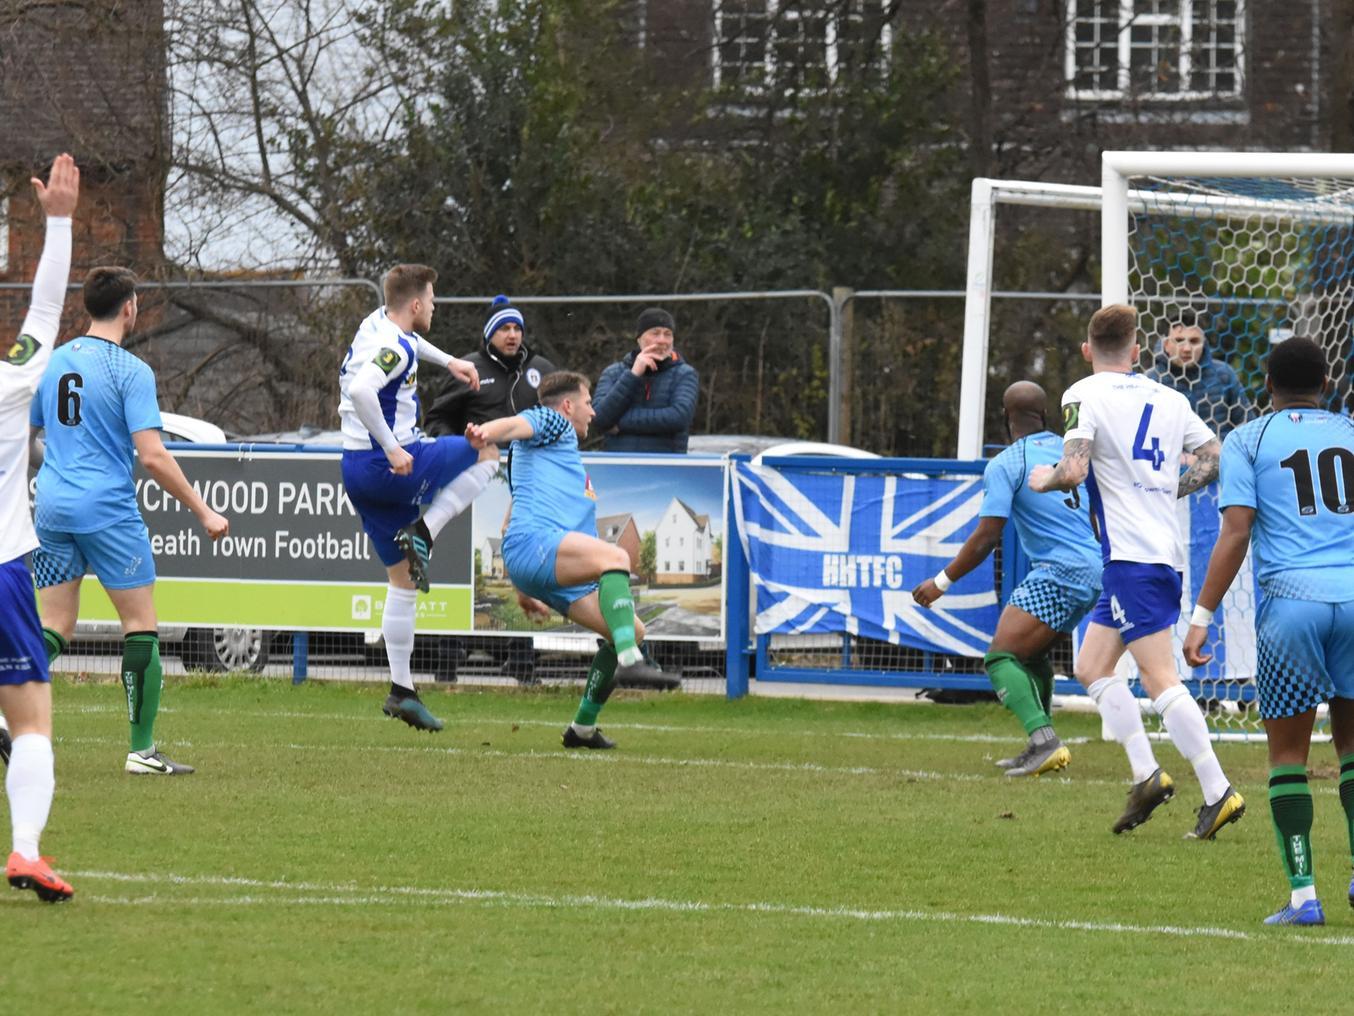 Josh Spinks scores the first goal.